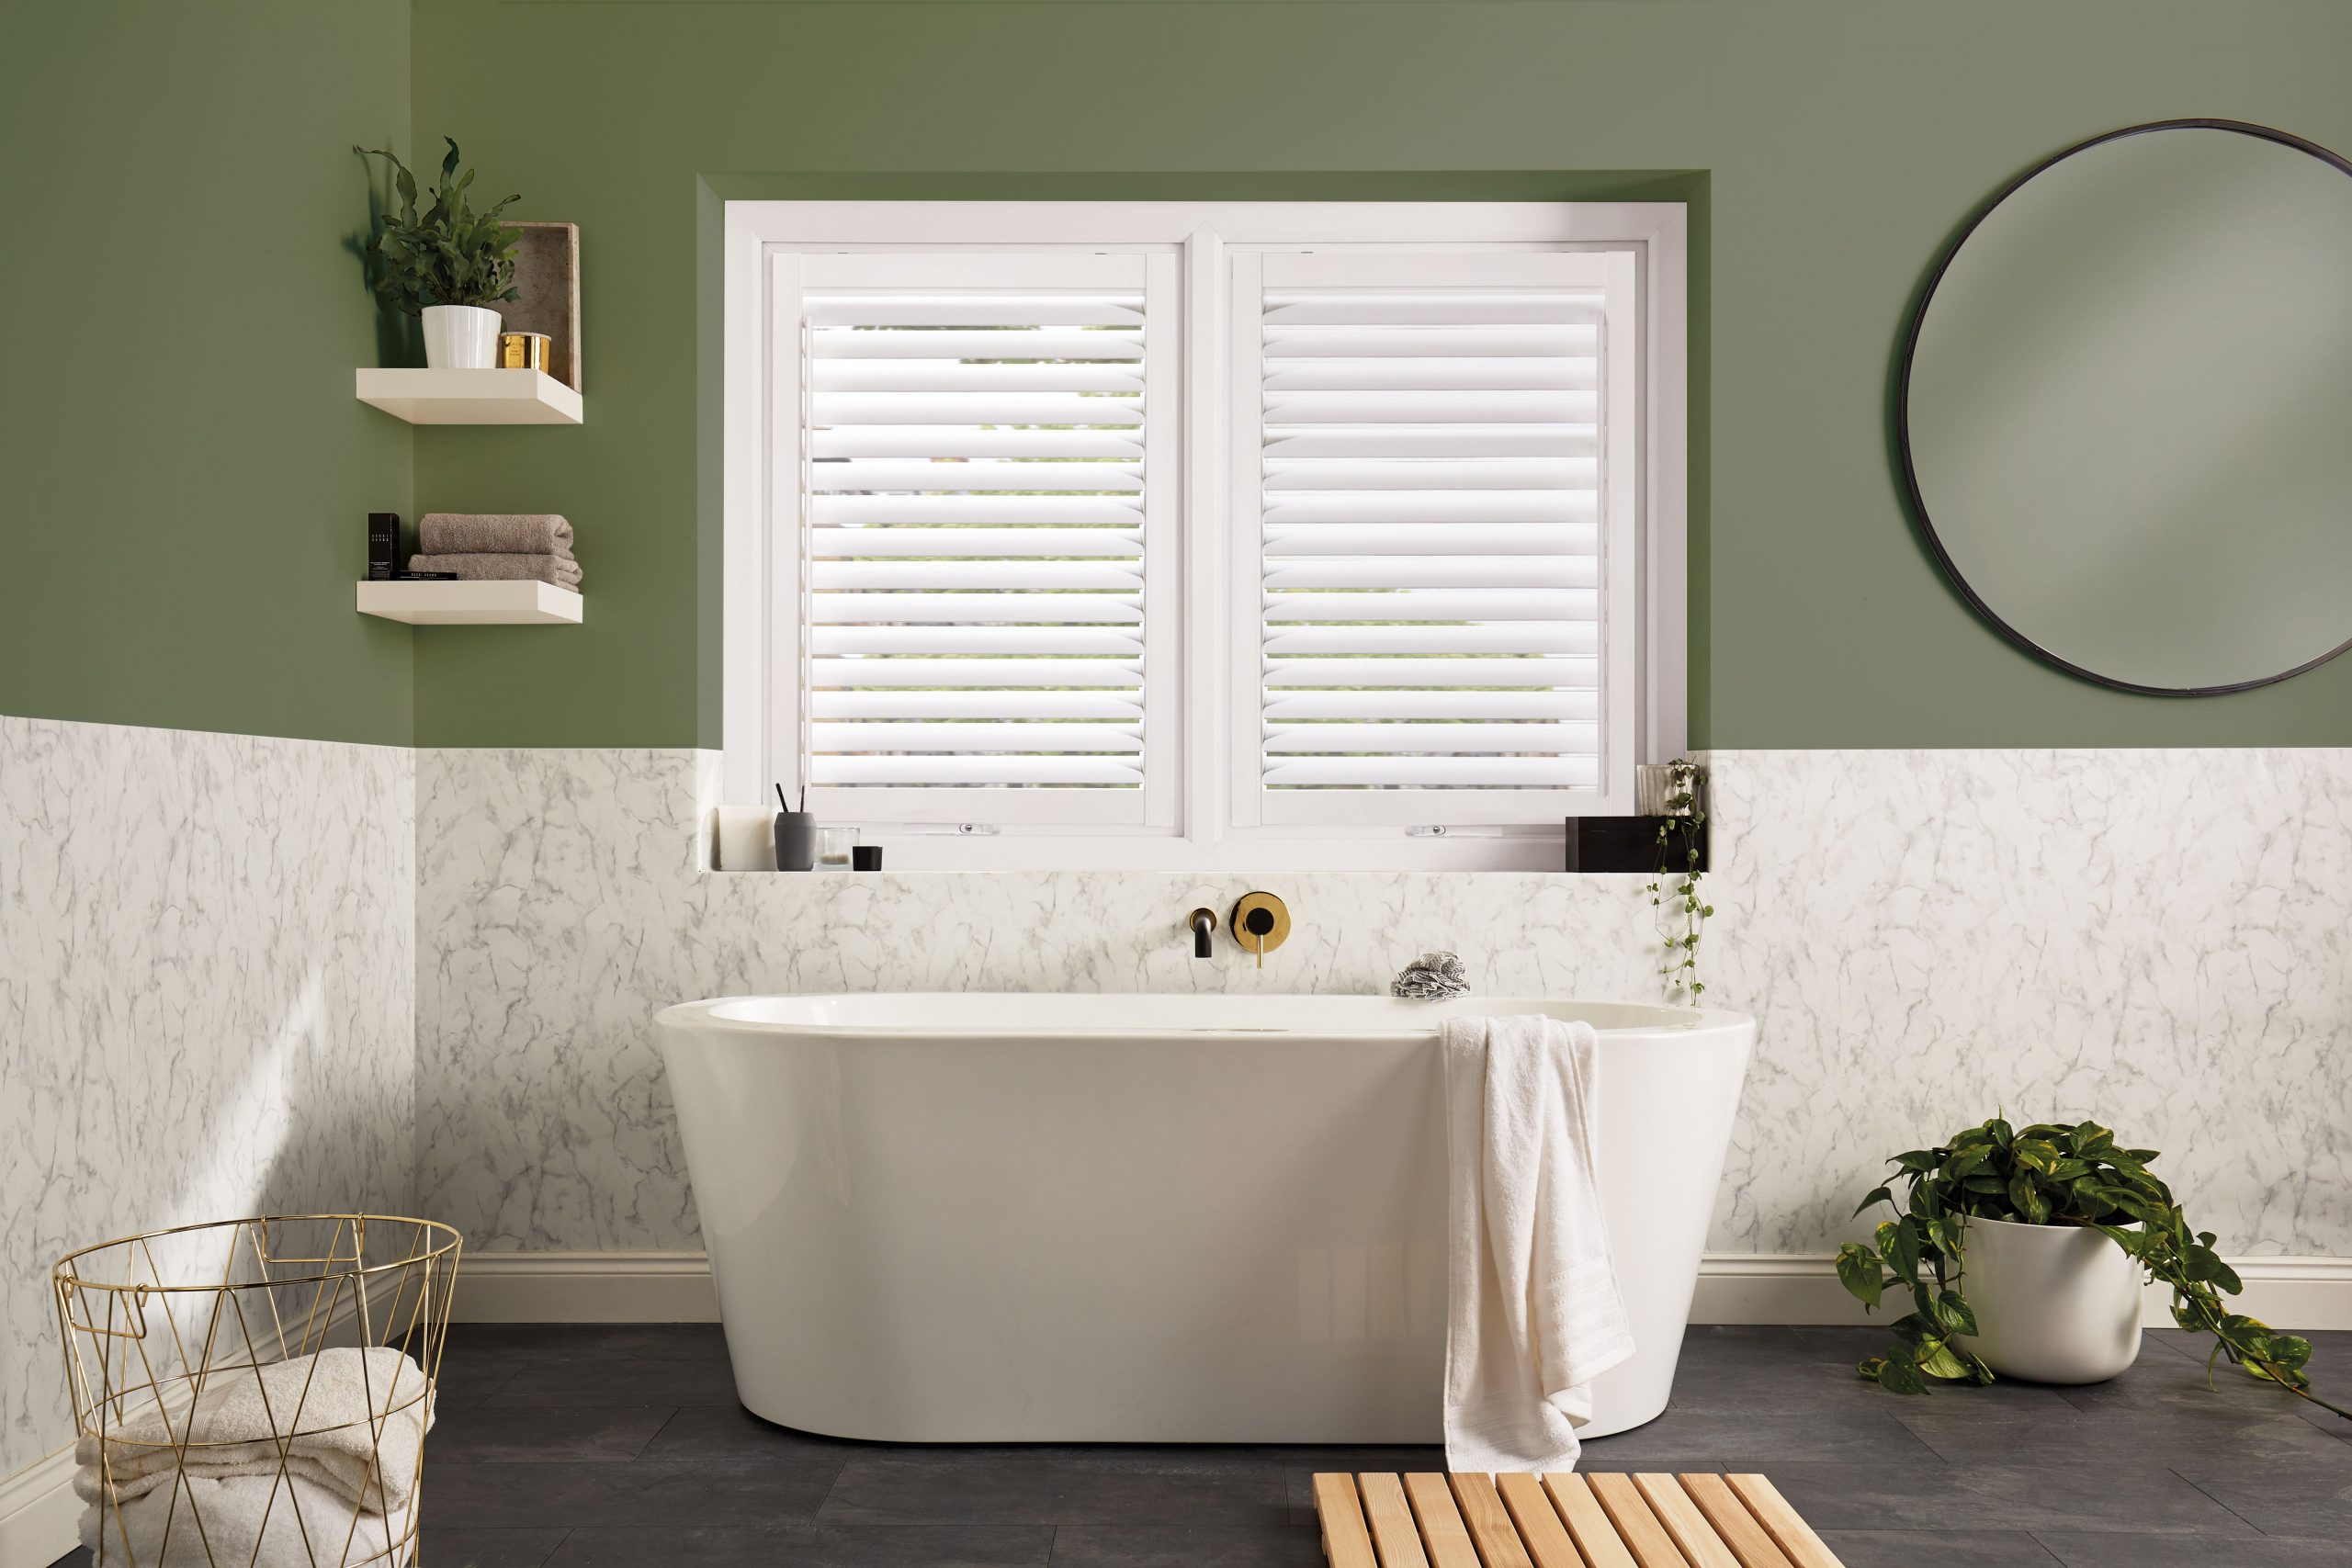 Perfect fit shutters lite are waterproof and suitable for bathrooms